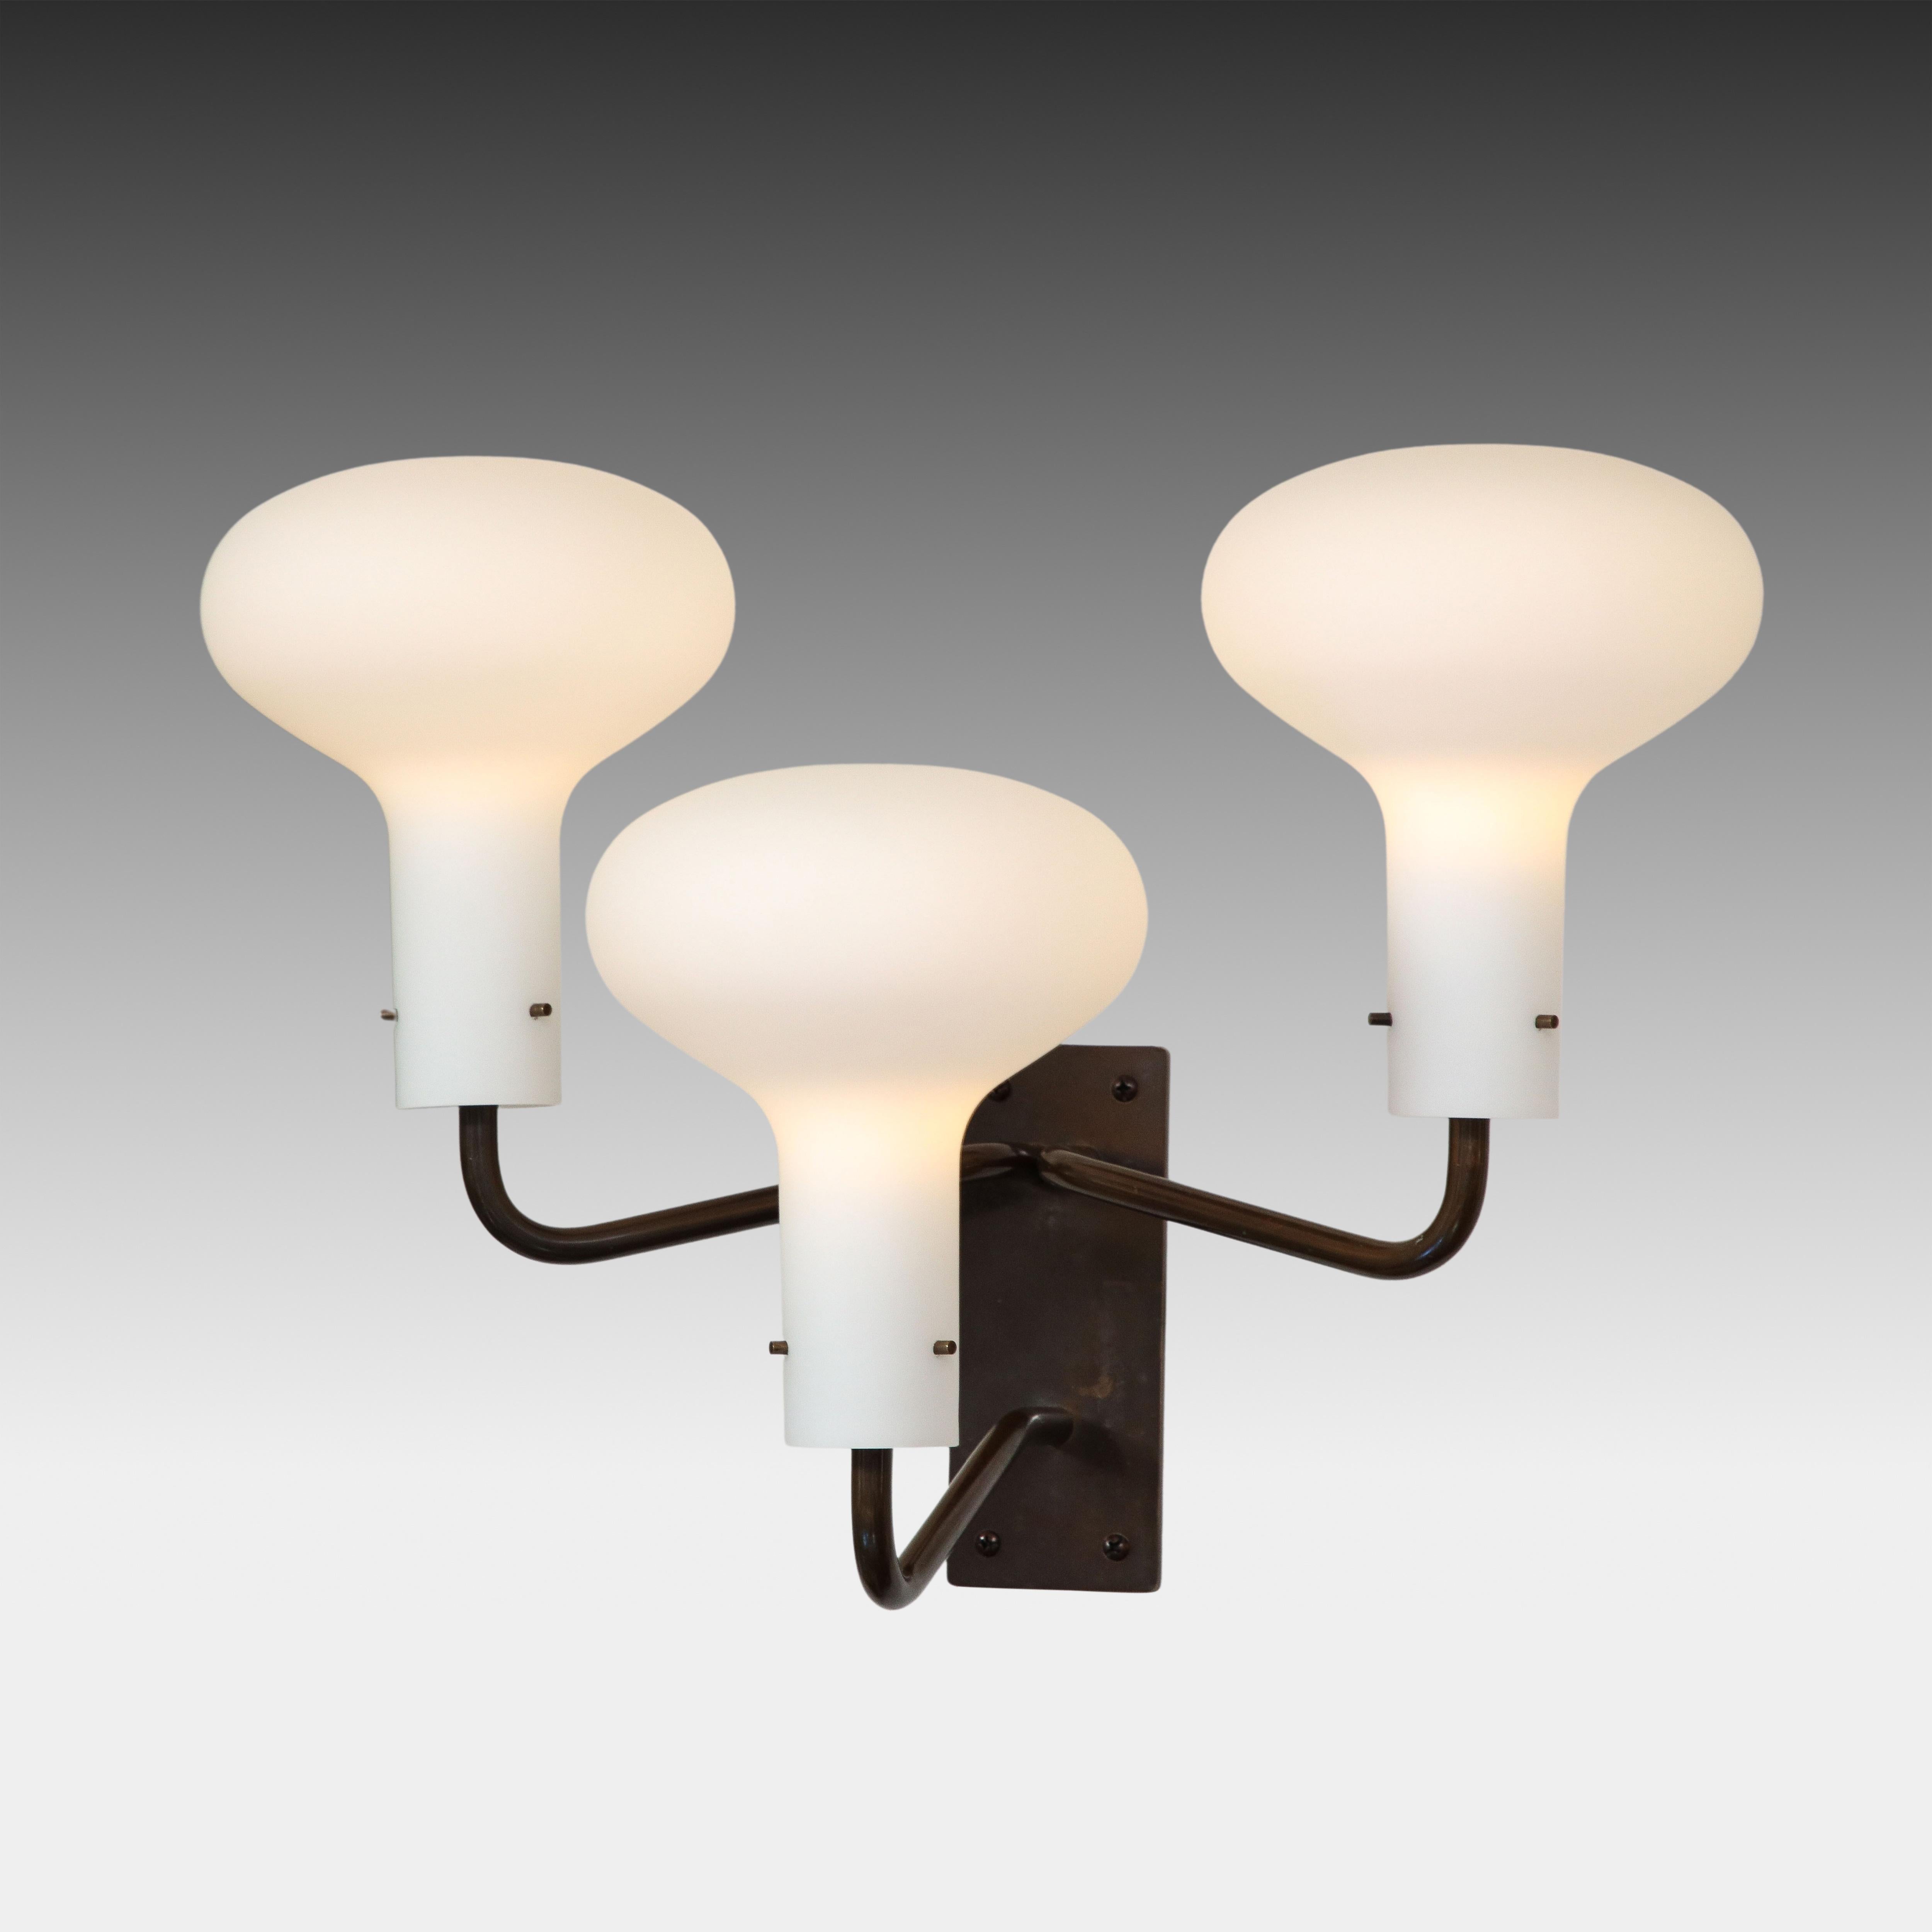 Italian Ignazio Gardella for Azucena Pair of Wall Lights Model LP12, Italy, 1950s For Sale